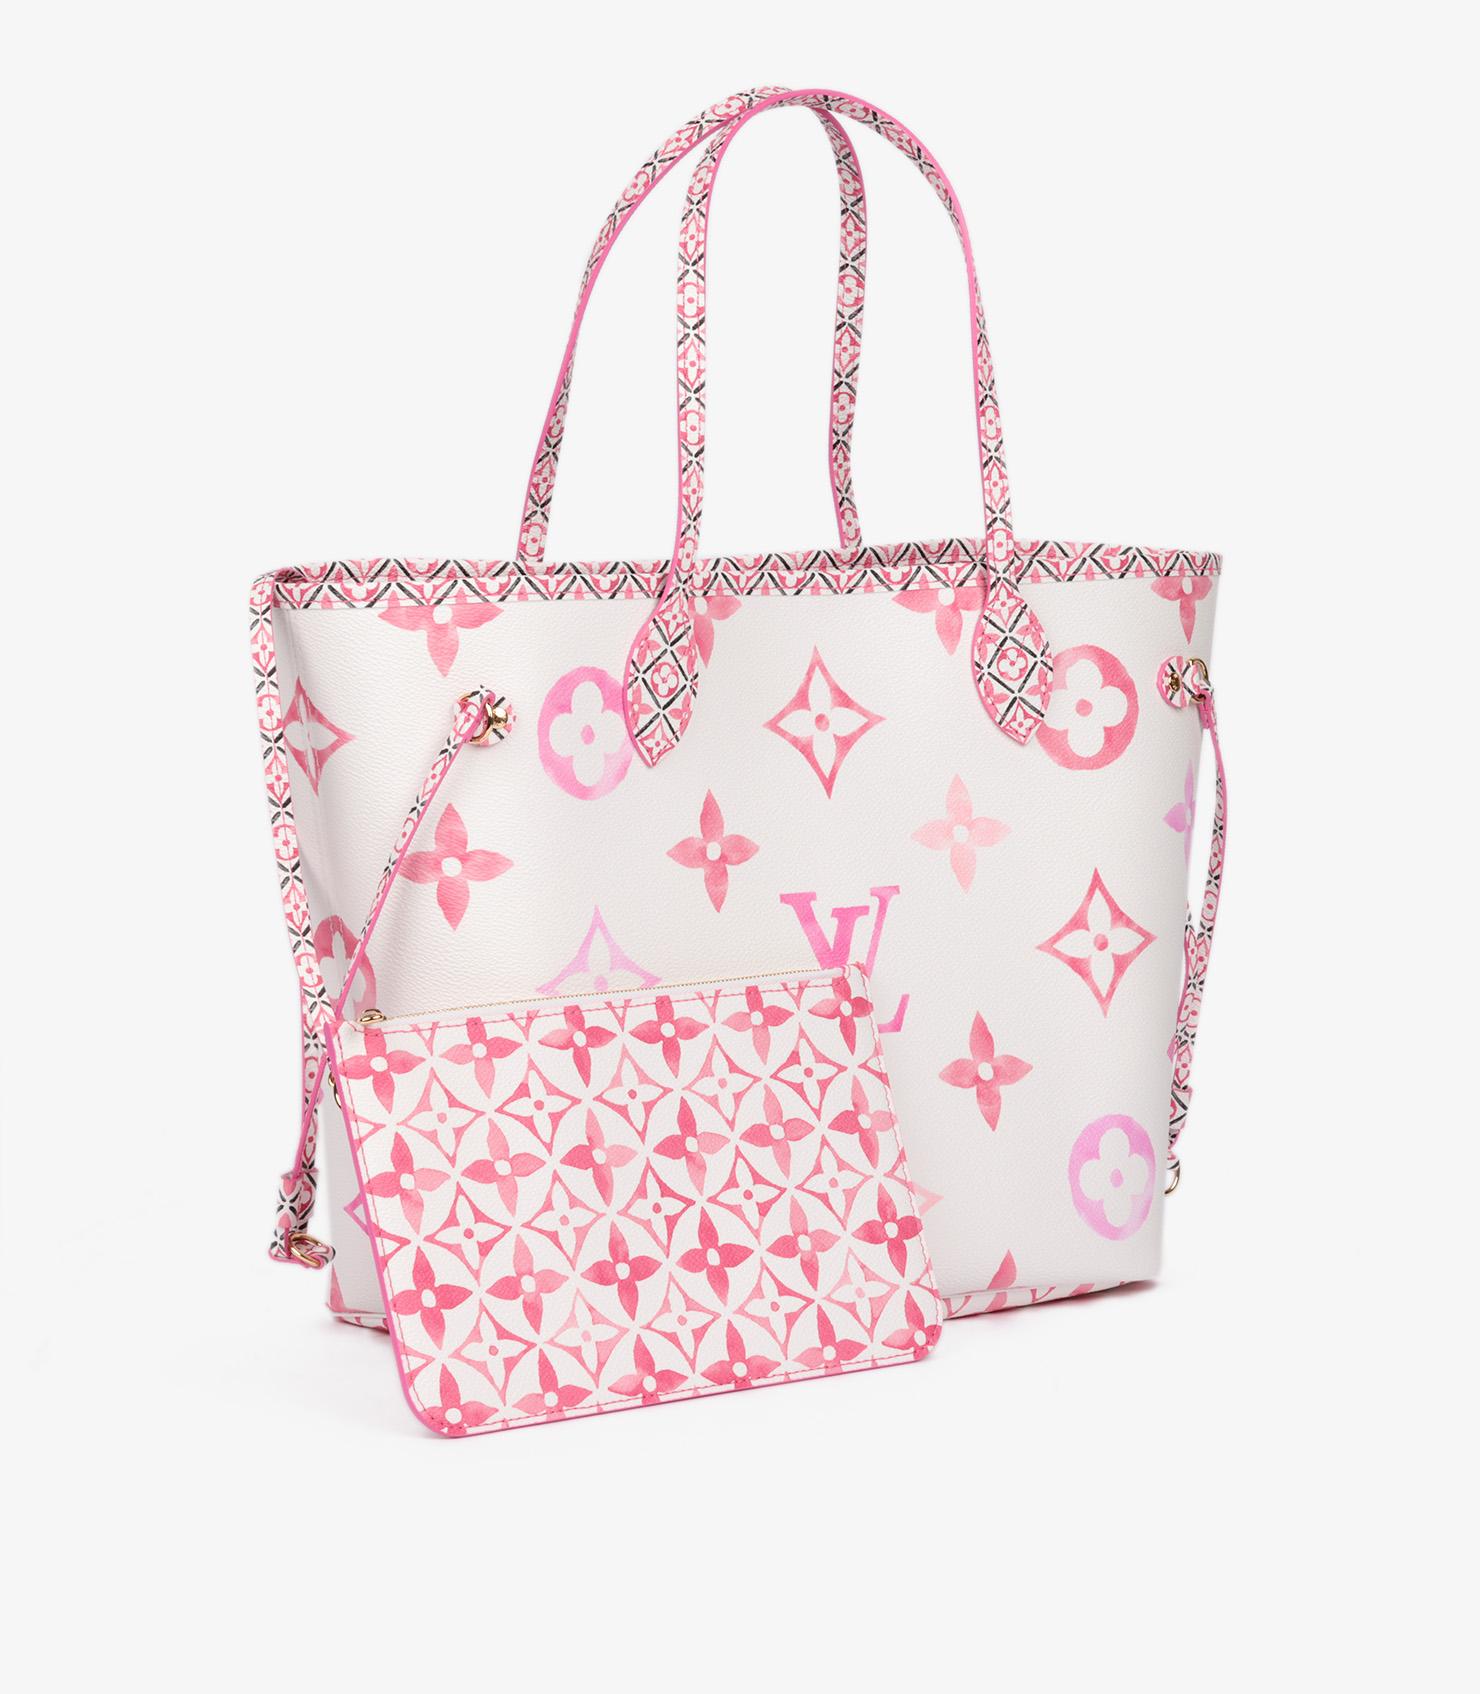 Louis Vuitton White & Pink Monogram Canvas By The Pool Neverfull MM

Brand- Louis Vuitton
Model- Neverfull MM
Product Type- Shopper, Shoulder, Tote
Accompanied By- Louis Vuitton Dust Bag, Box, Copy of Louis Vuitton Receipt
Colour- Pink
Hardware-